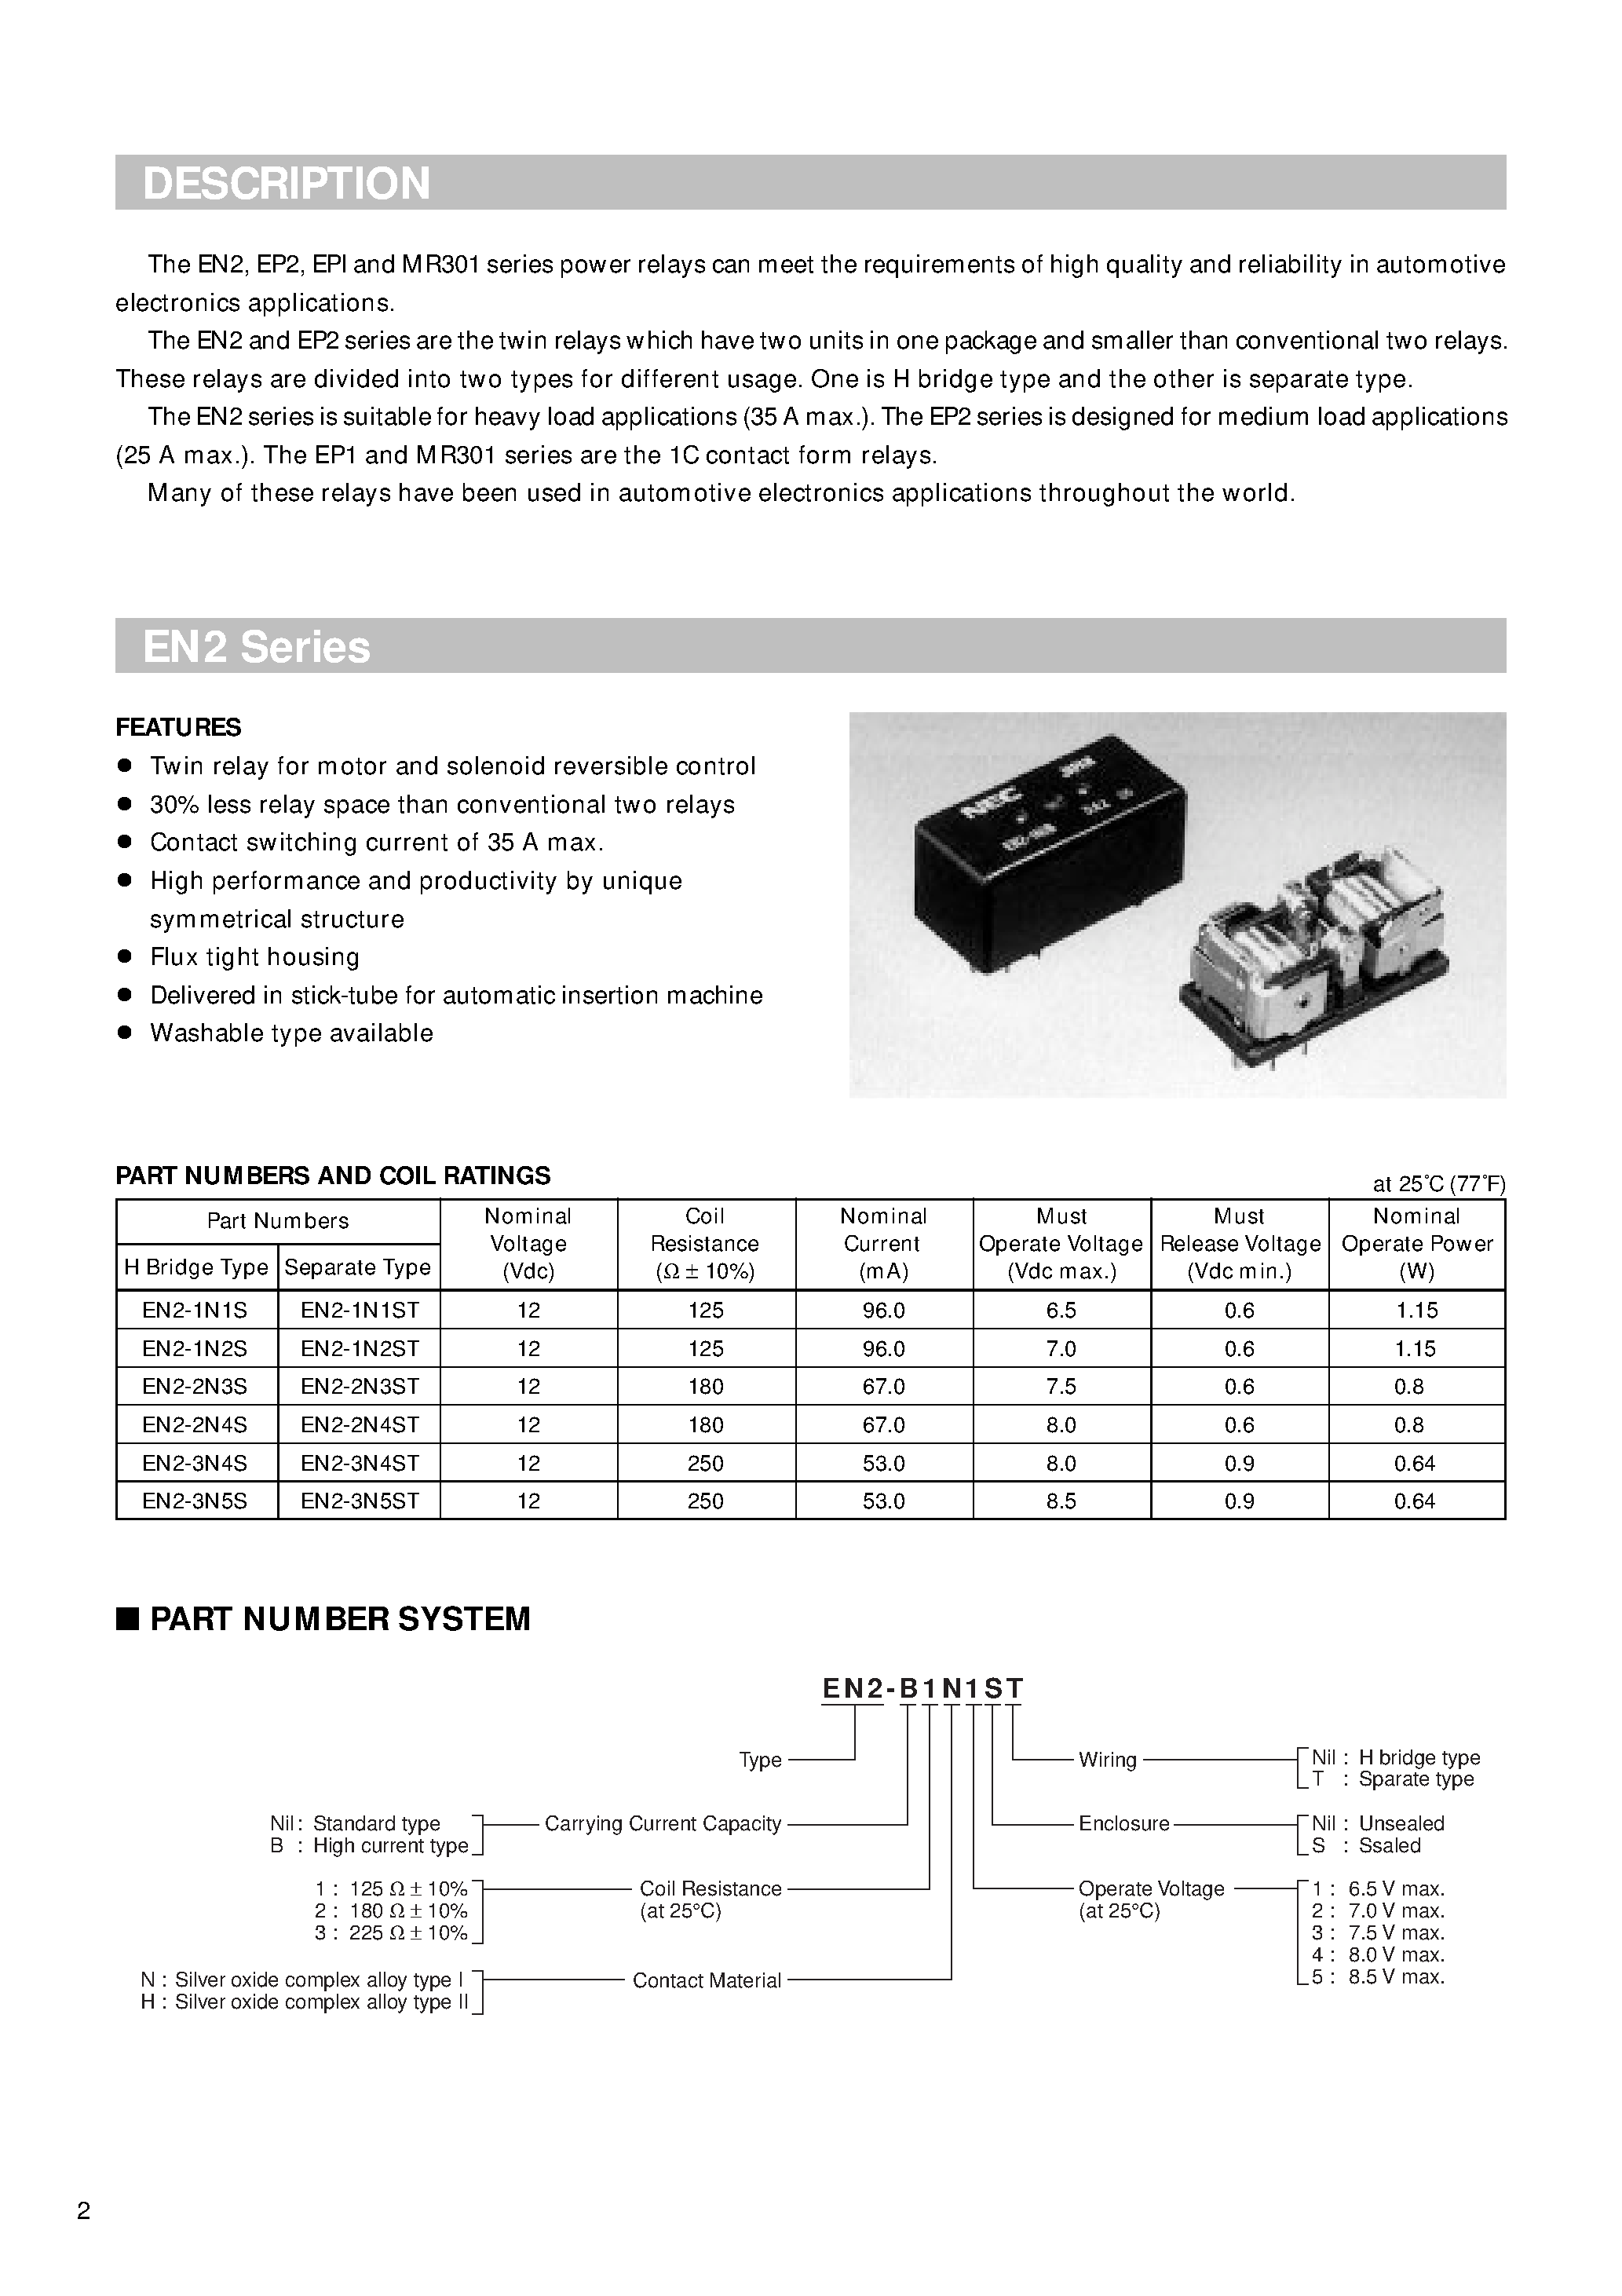 Datasheet EN2-2N3T - Twin relay for motor and solenoid reversible control page 2